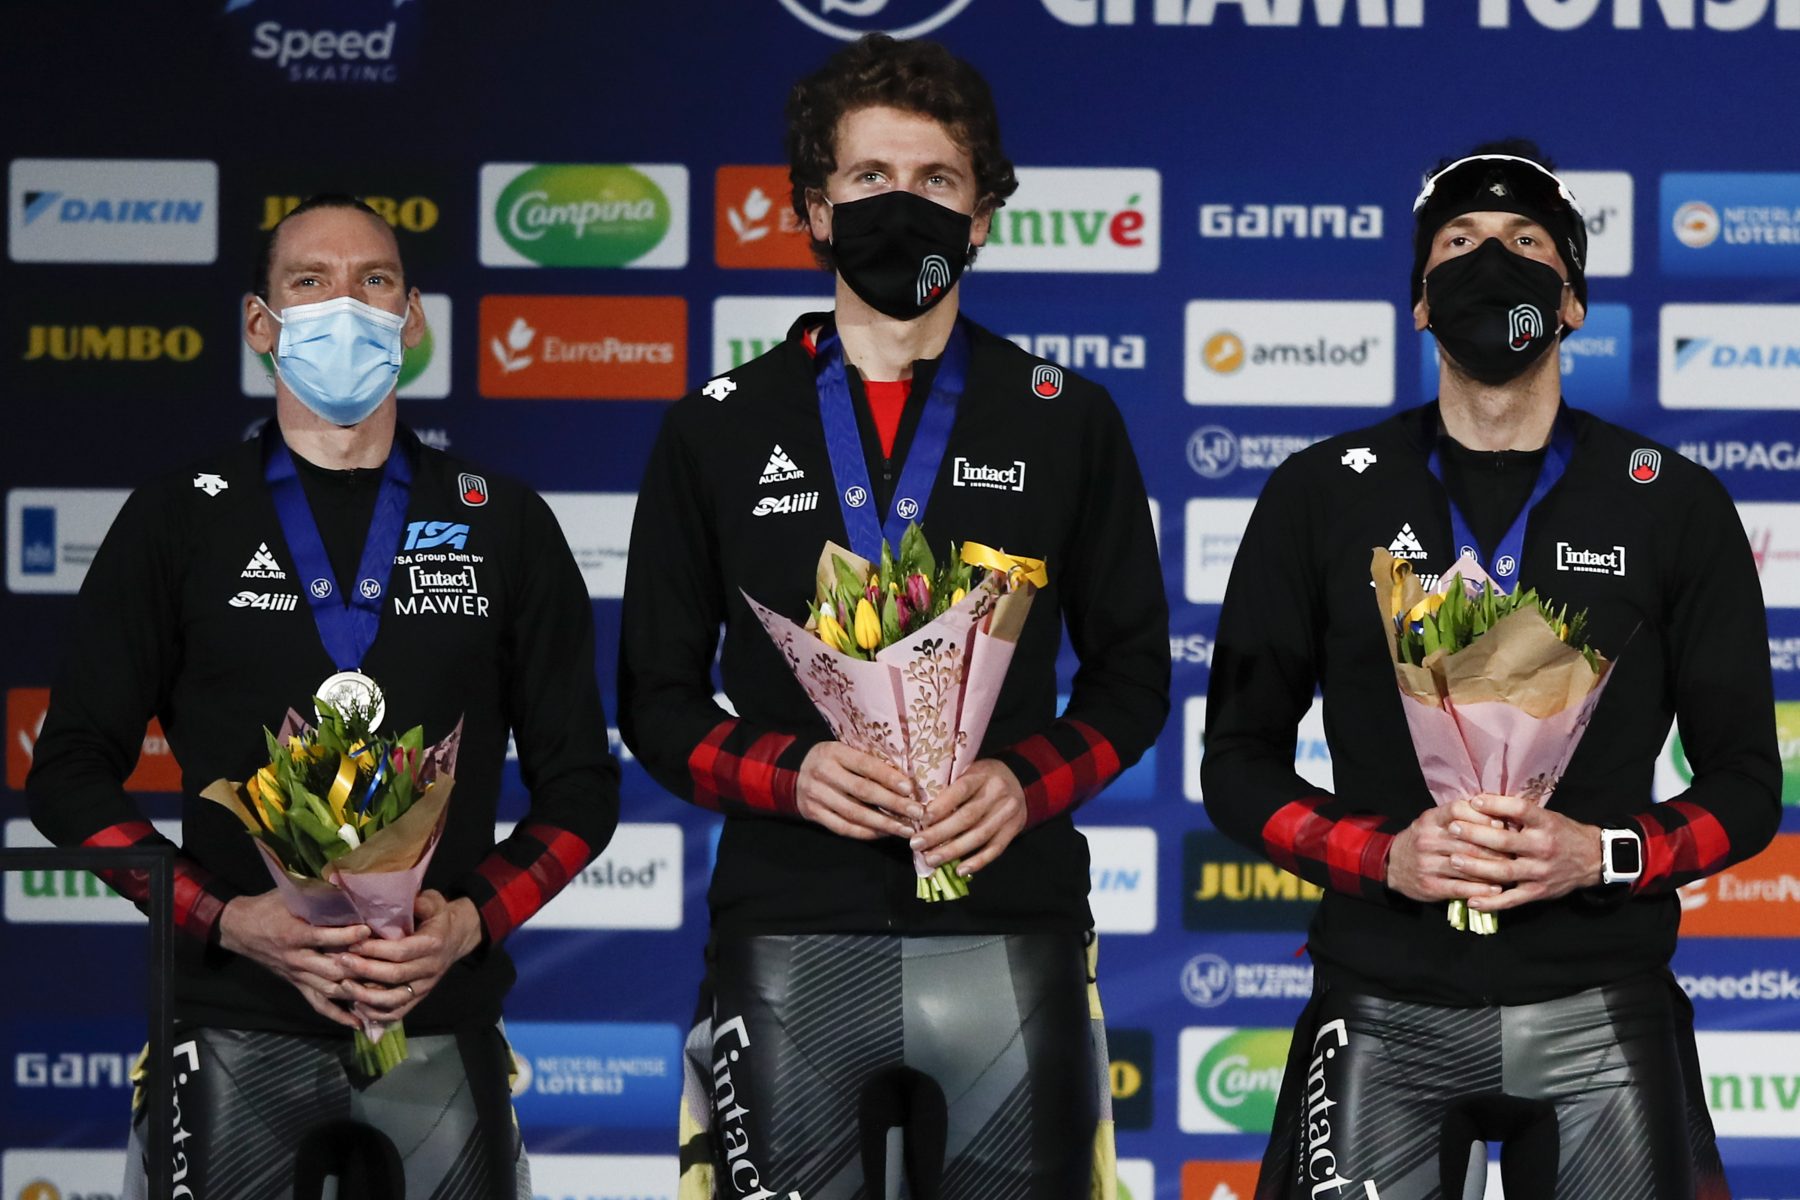 Team Canada with Ted-Jan Bloemen, left, Jordan Belchos, right, and Connor Howe, center, celebrates with their silver medals on the podium of the men's team pursuit race of the World Championships Speedskating Single Distance at the Thialf ice arena in Heerenveen, northern Netherlands, Friday, Feb. 12, 2021. (AP Photo/Peter Dejong)